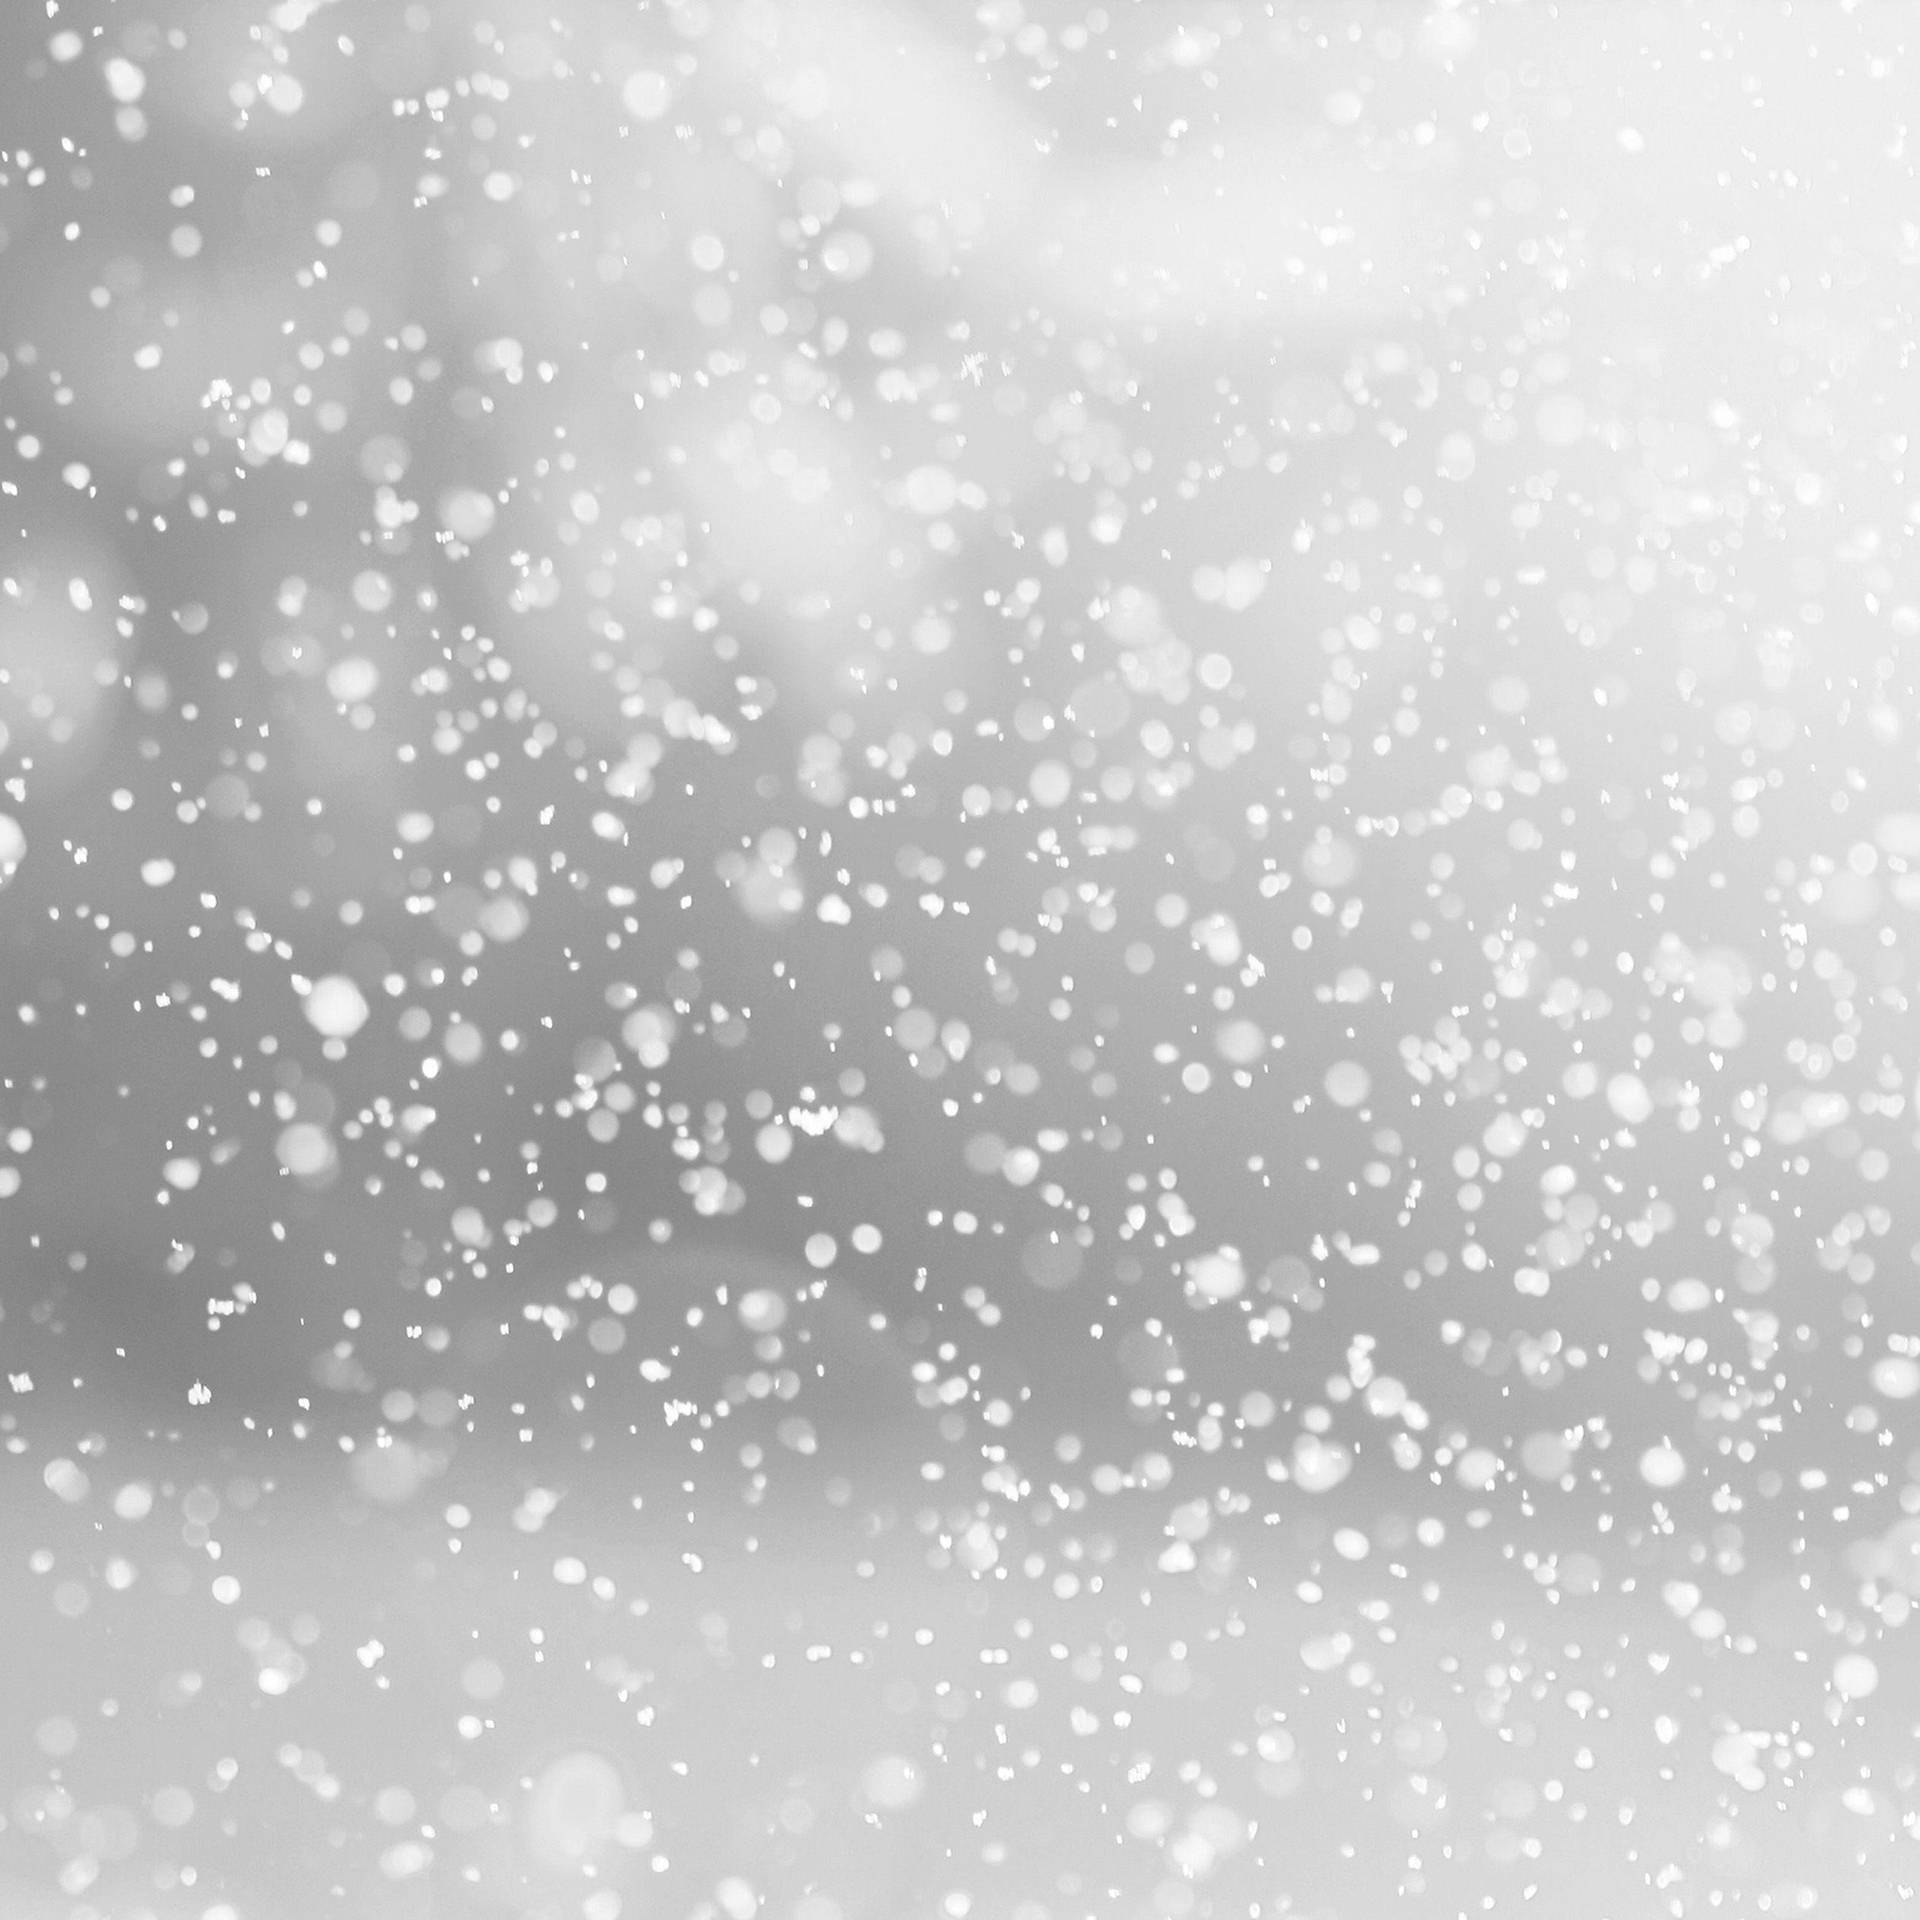 Snow 2524X2524 Wallpaper and Background Image